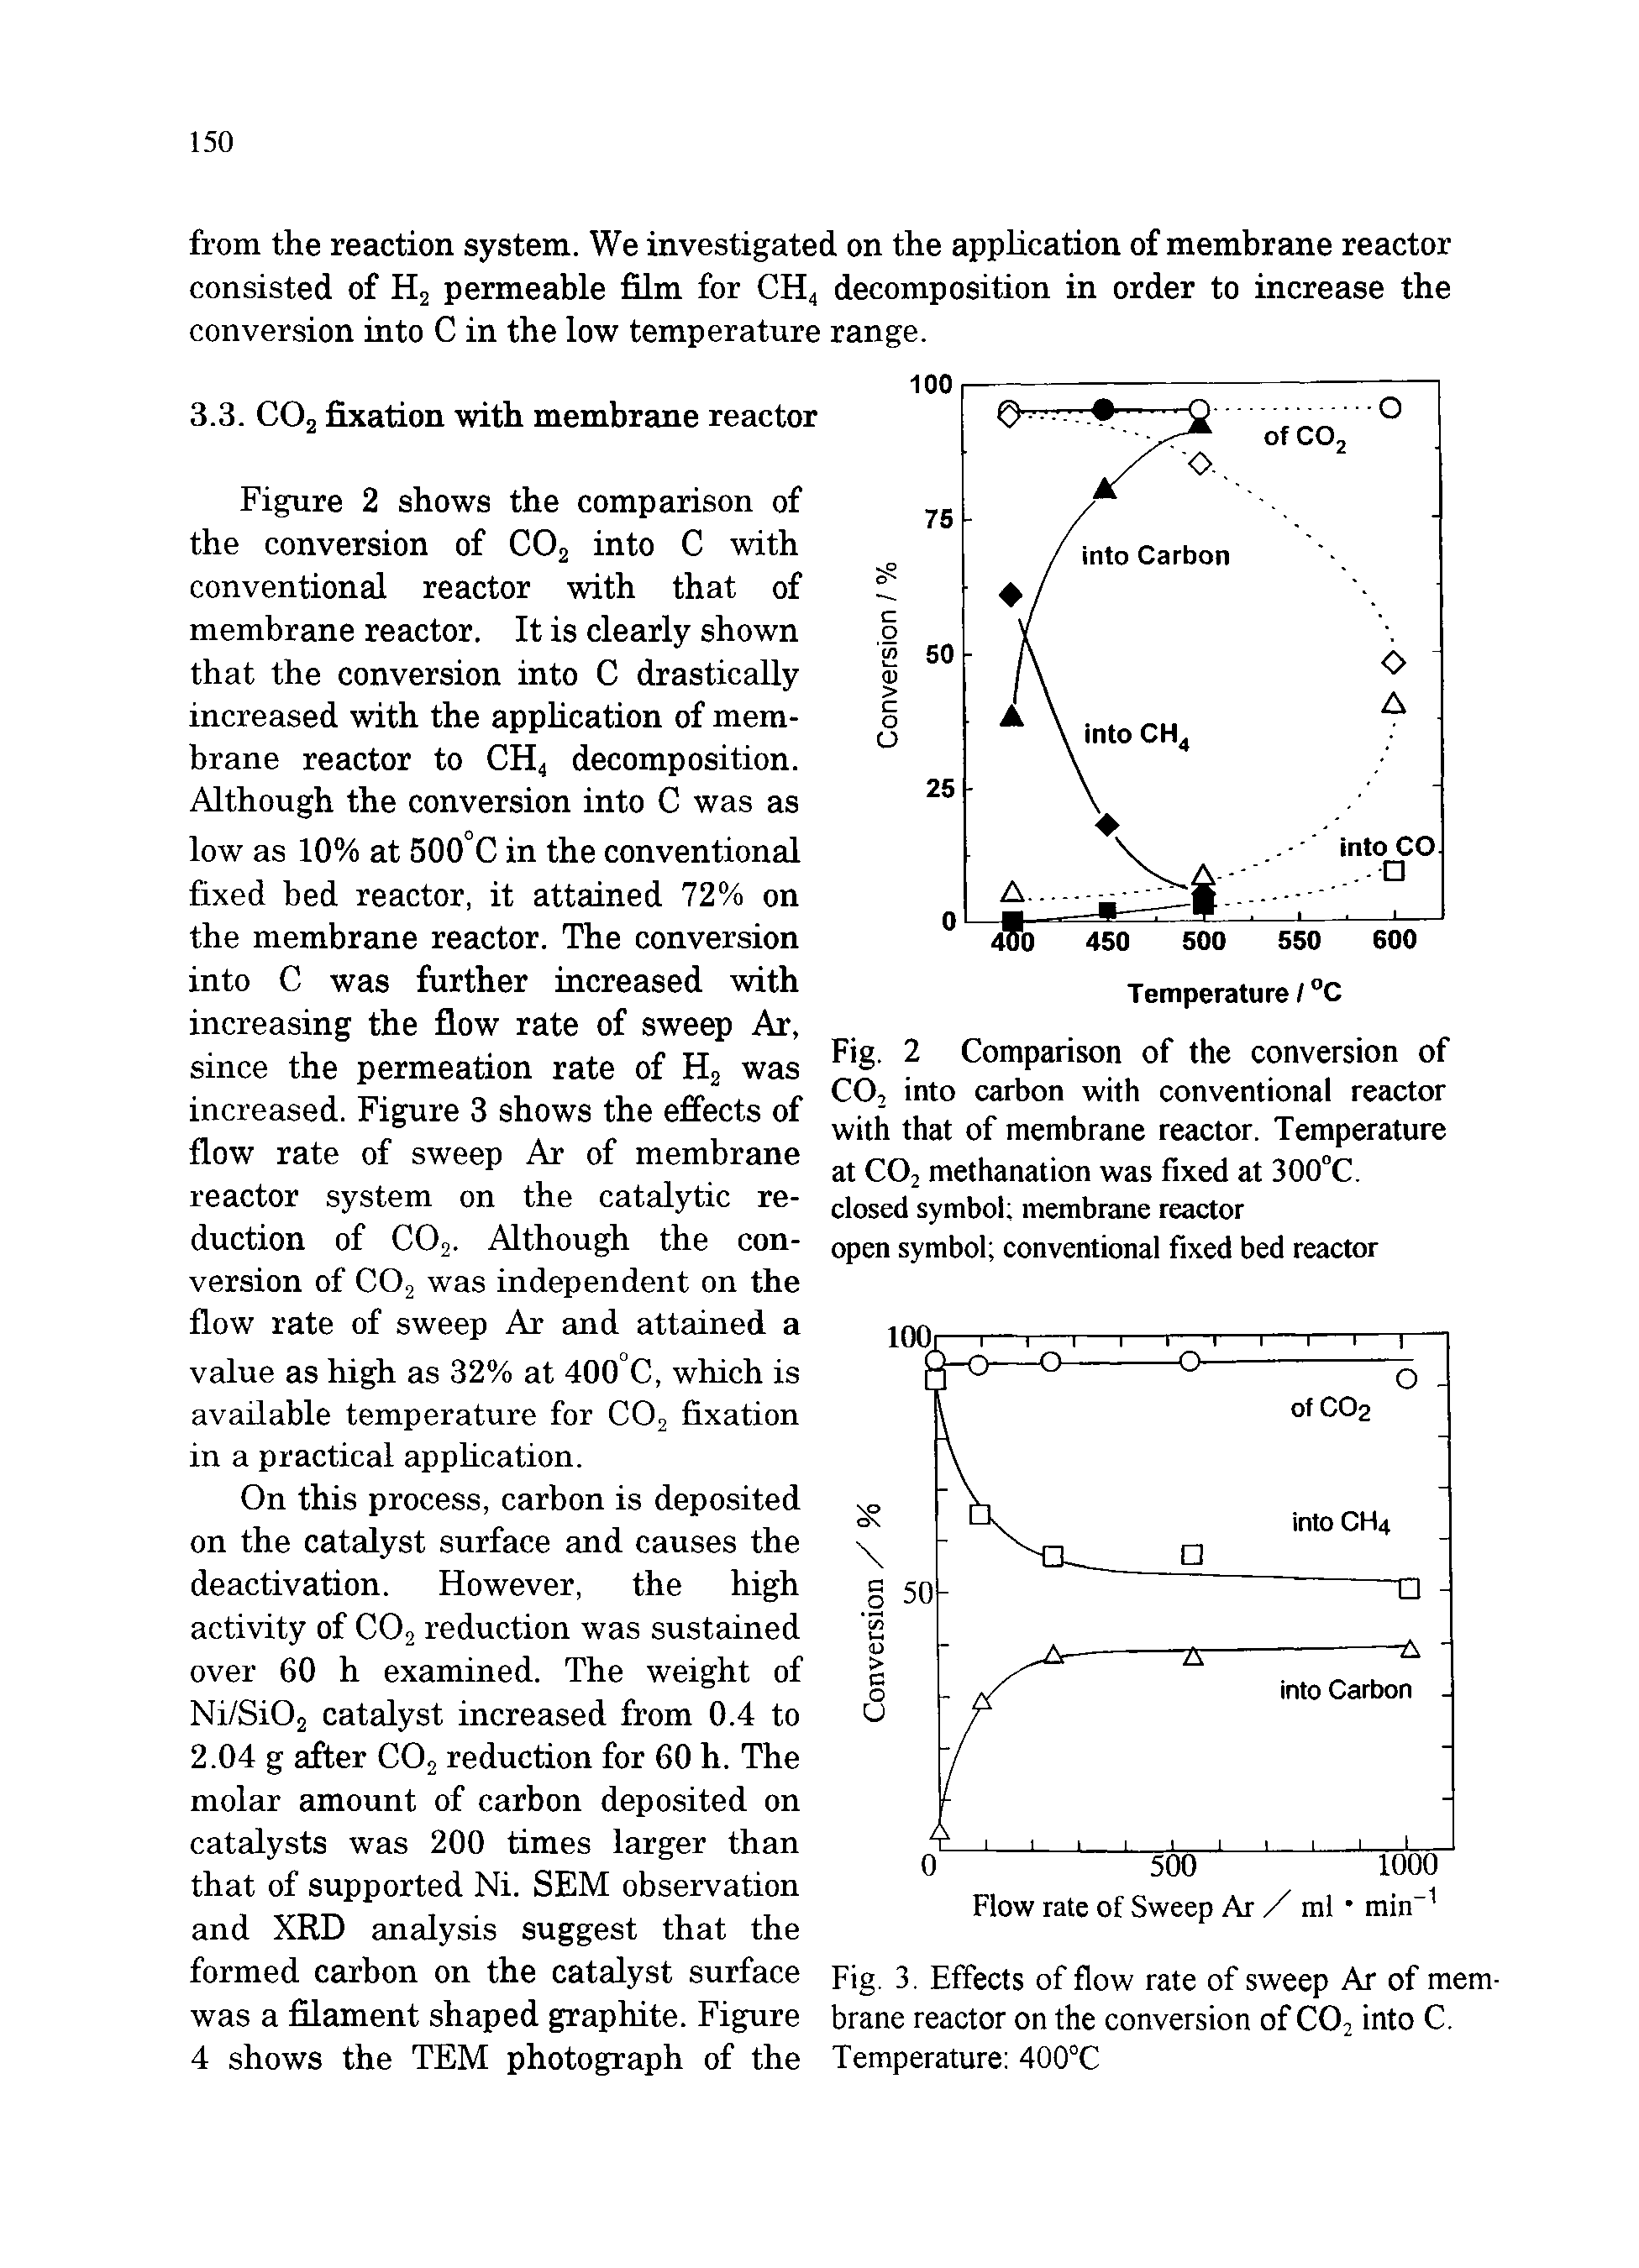 Fig. 2 Comparison of the conversion of CO2 into carbon with conventional reactor with that of membrane reactor. Temperature at CO2 methanation was fixed at 300°C. closed symbol membrane reactor open symbol conventional fixed bed reactor...